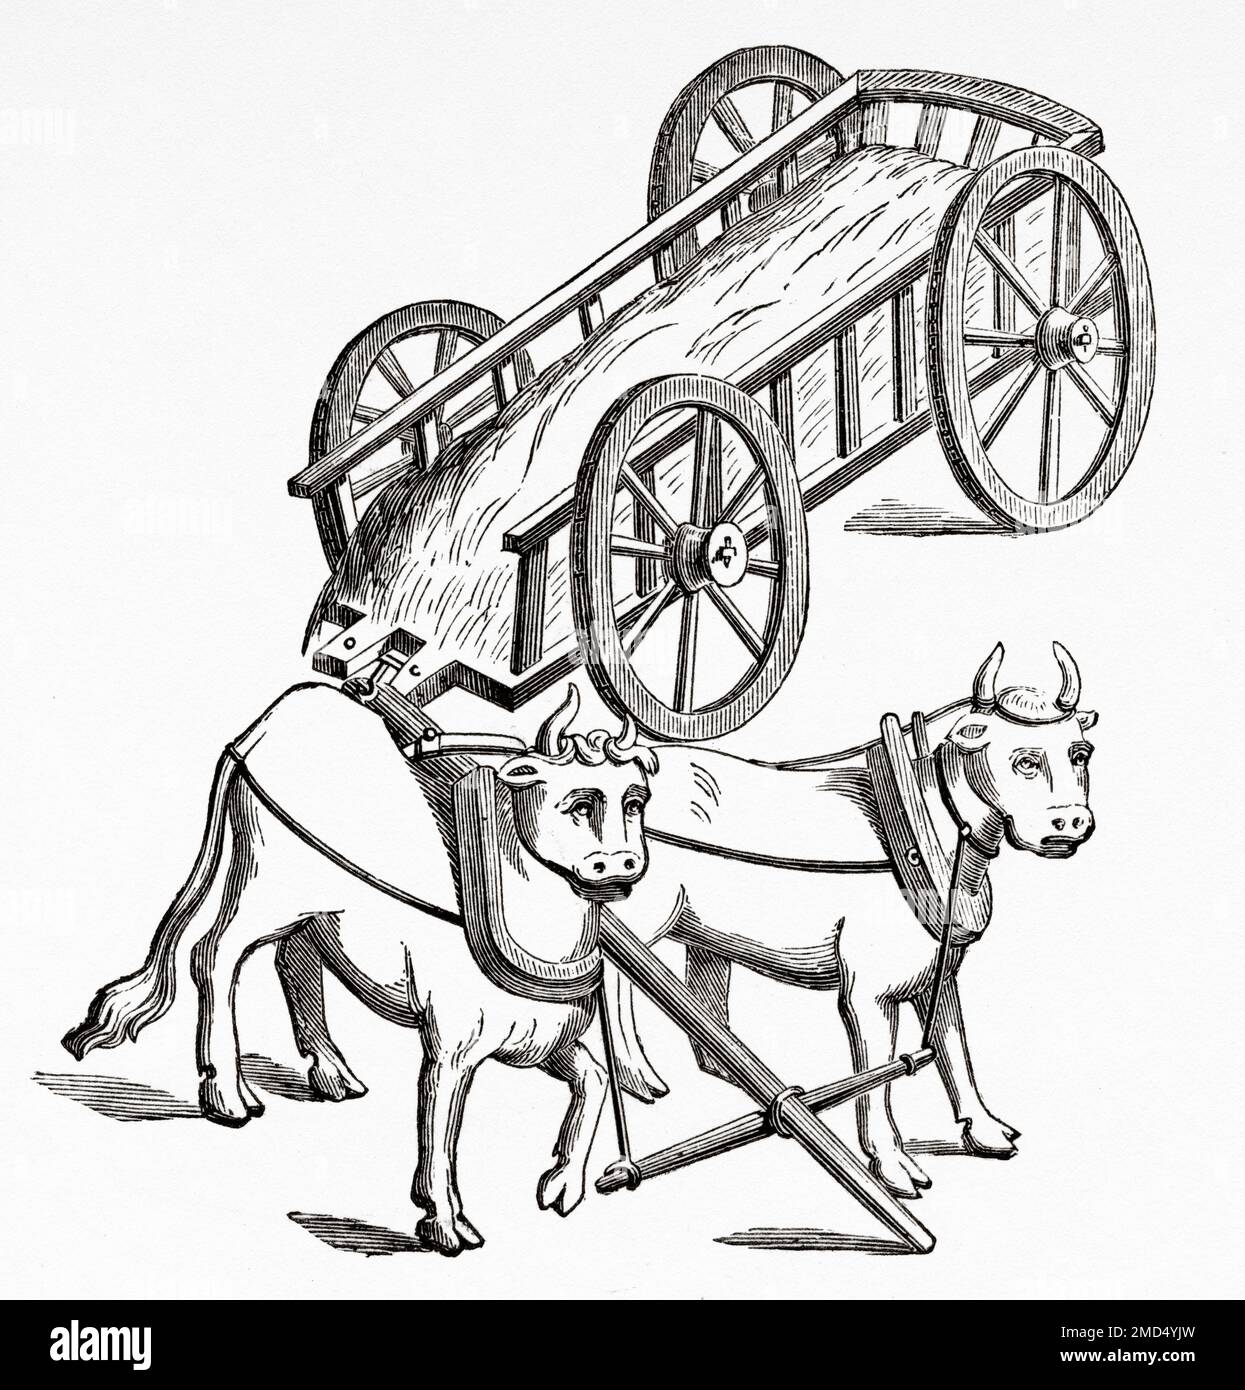 Cart drawn by oxen, 15th century. The Arts of the Middle Ages and at the Period of the Renaissance by Paul Lacroix, 1874 Stock Photo